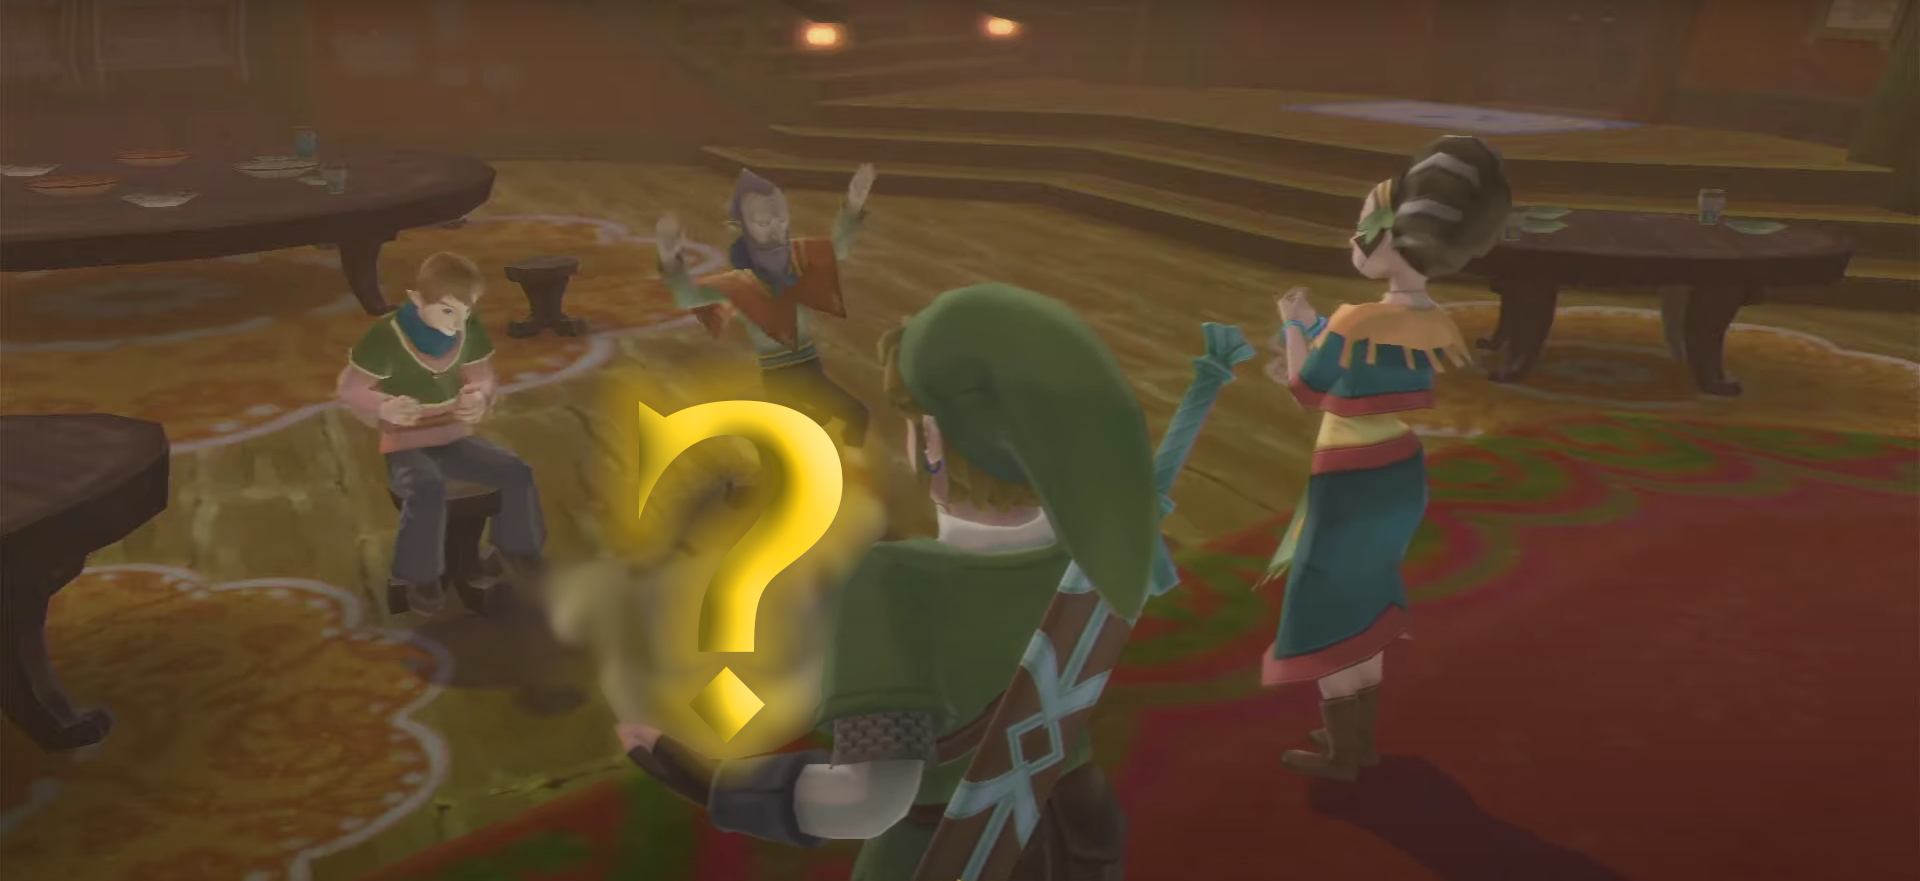 Daily Debate What Instrument Should Link Play in the Next Zelda Game